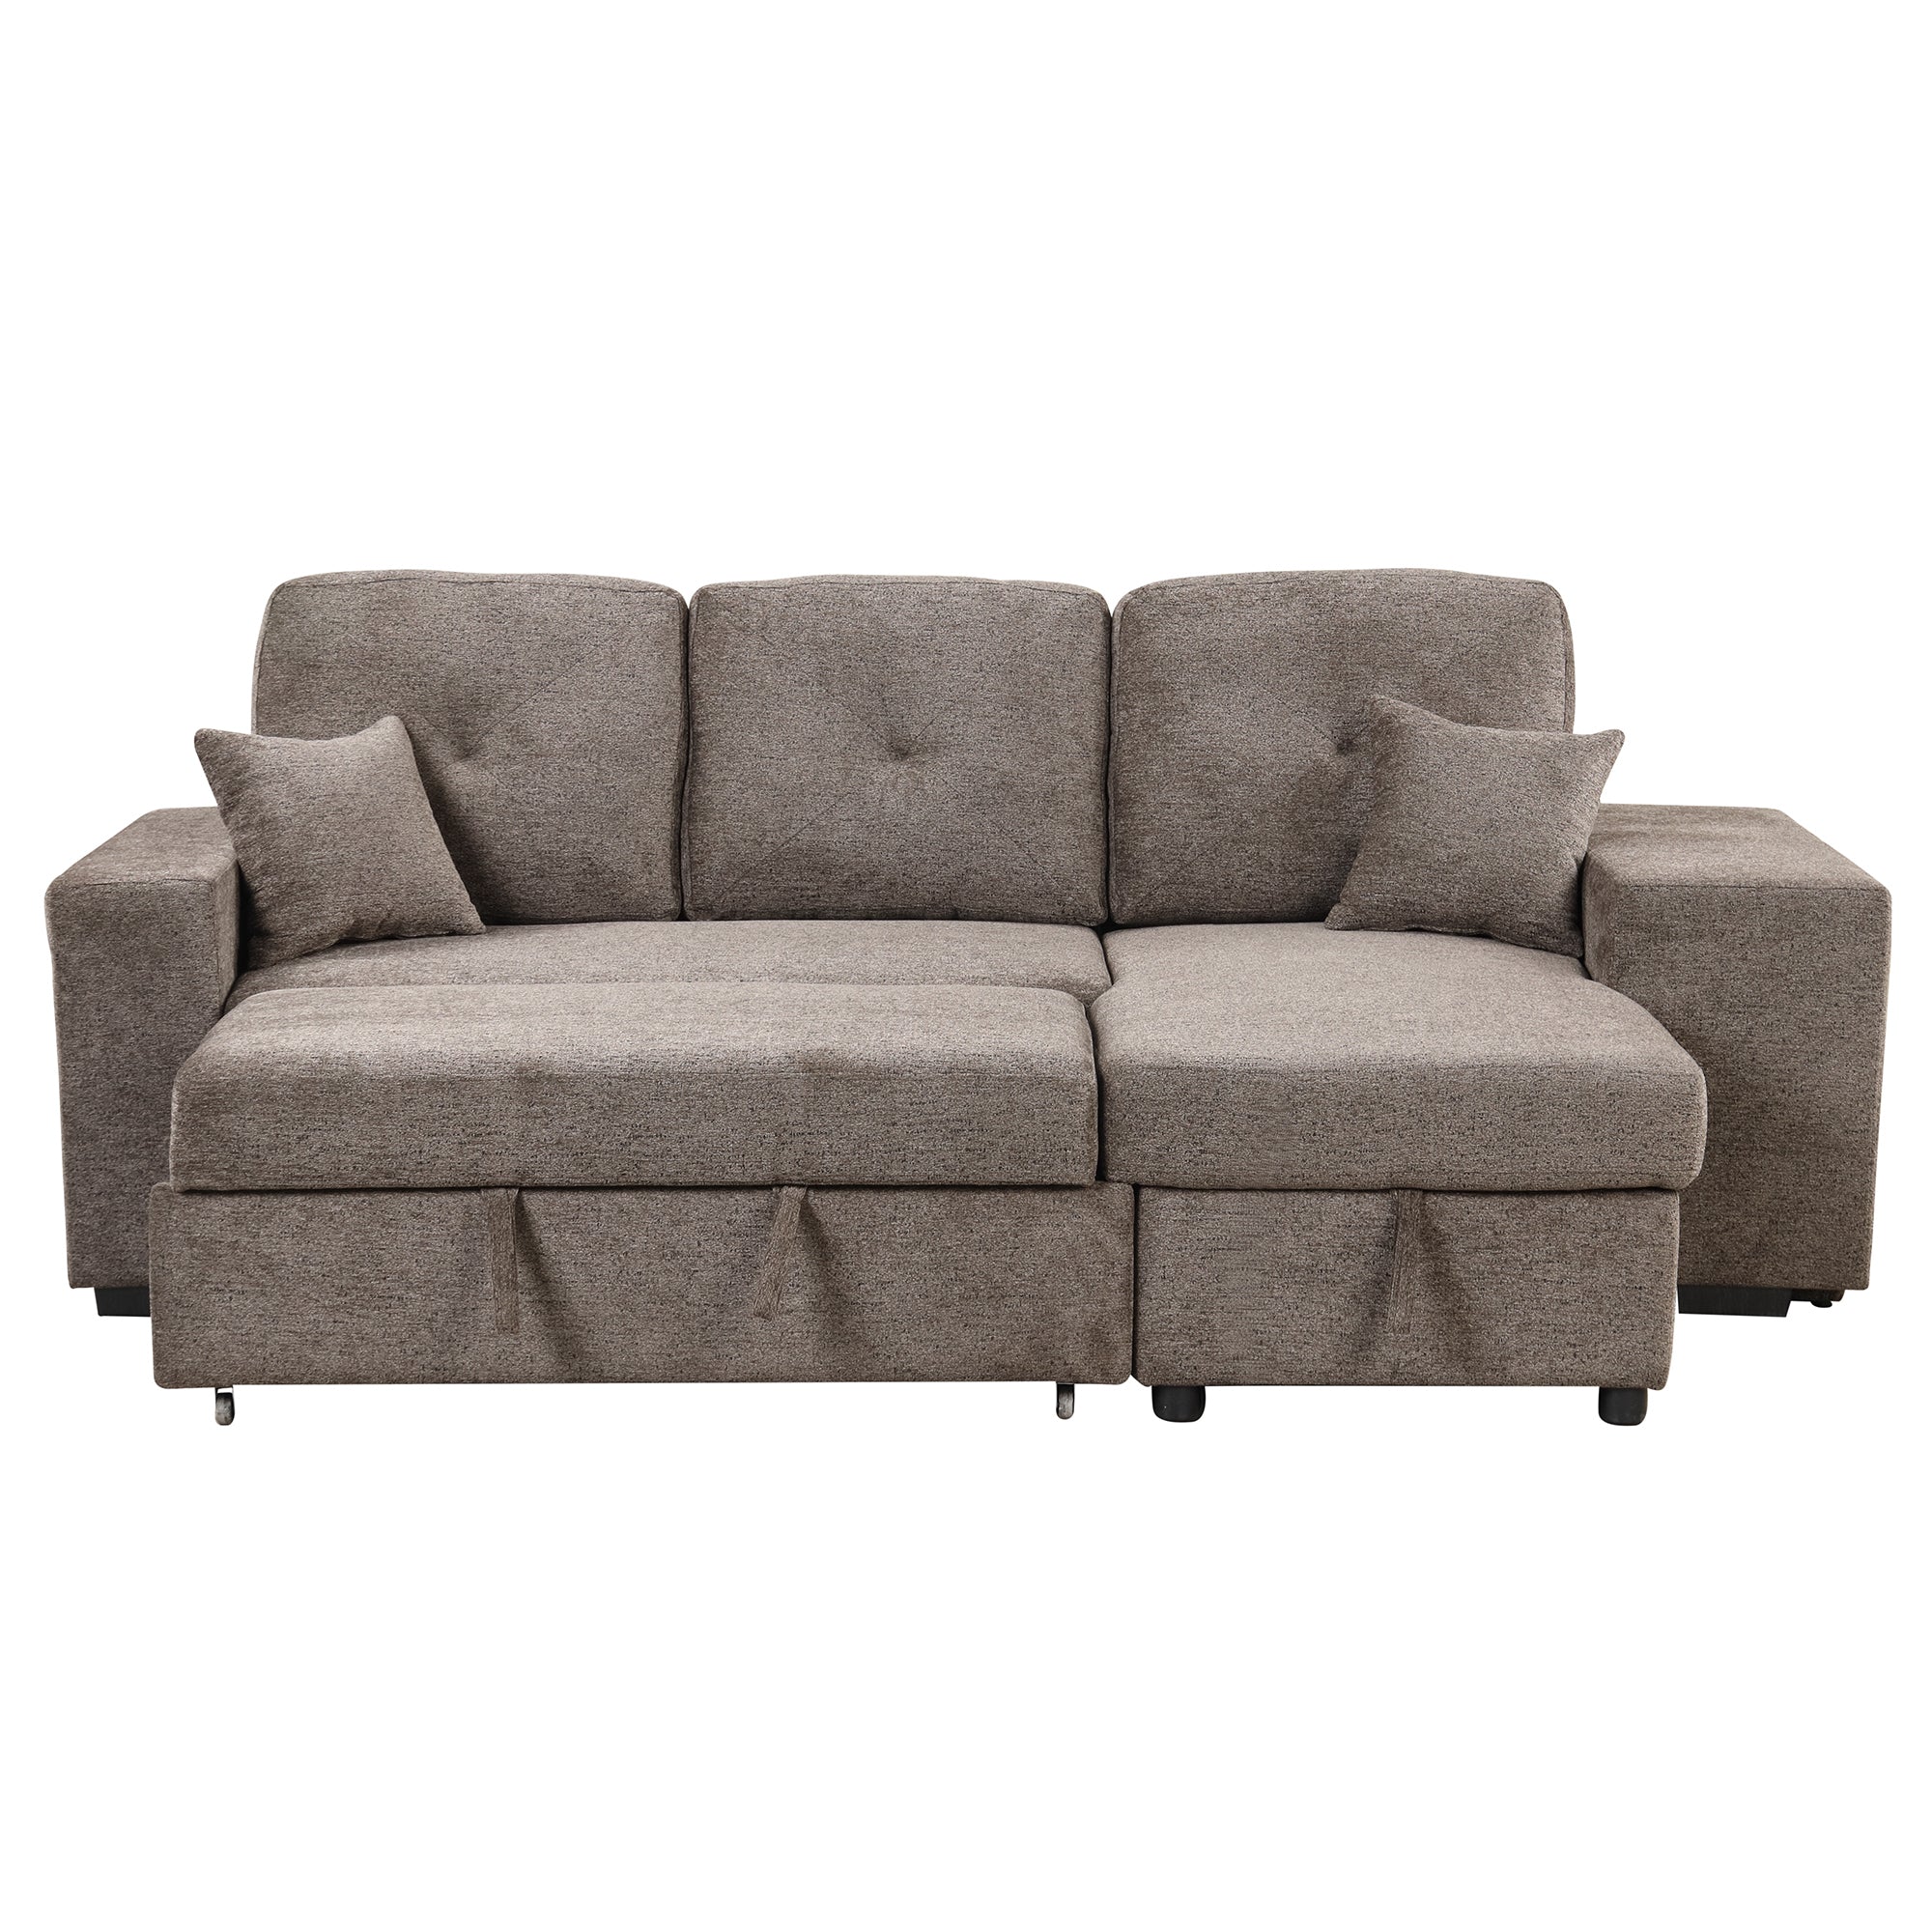 Brown Velvet Reversible Sleeper Sectional Sofa Bed with Storage Chaise & Stools-Sleeper Sectionals-American Furniture Outlet